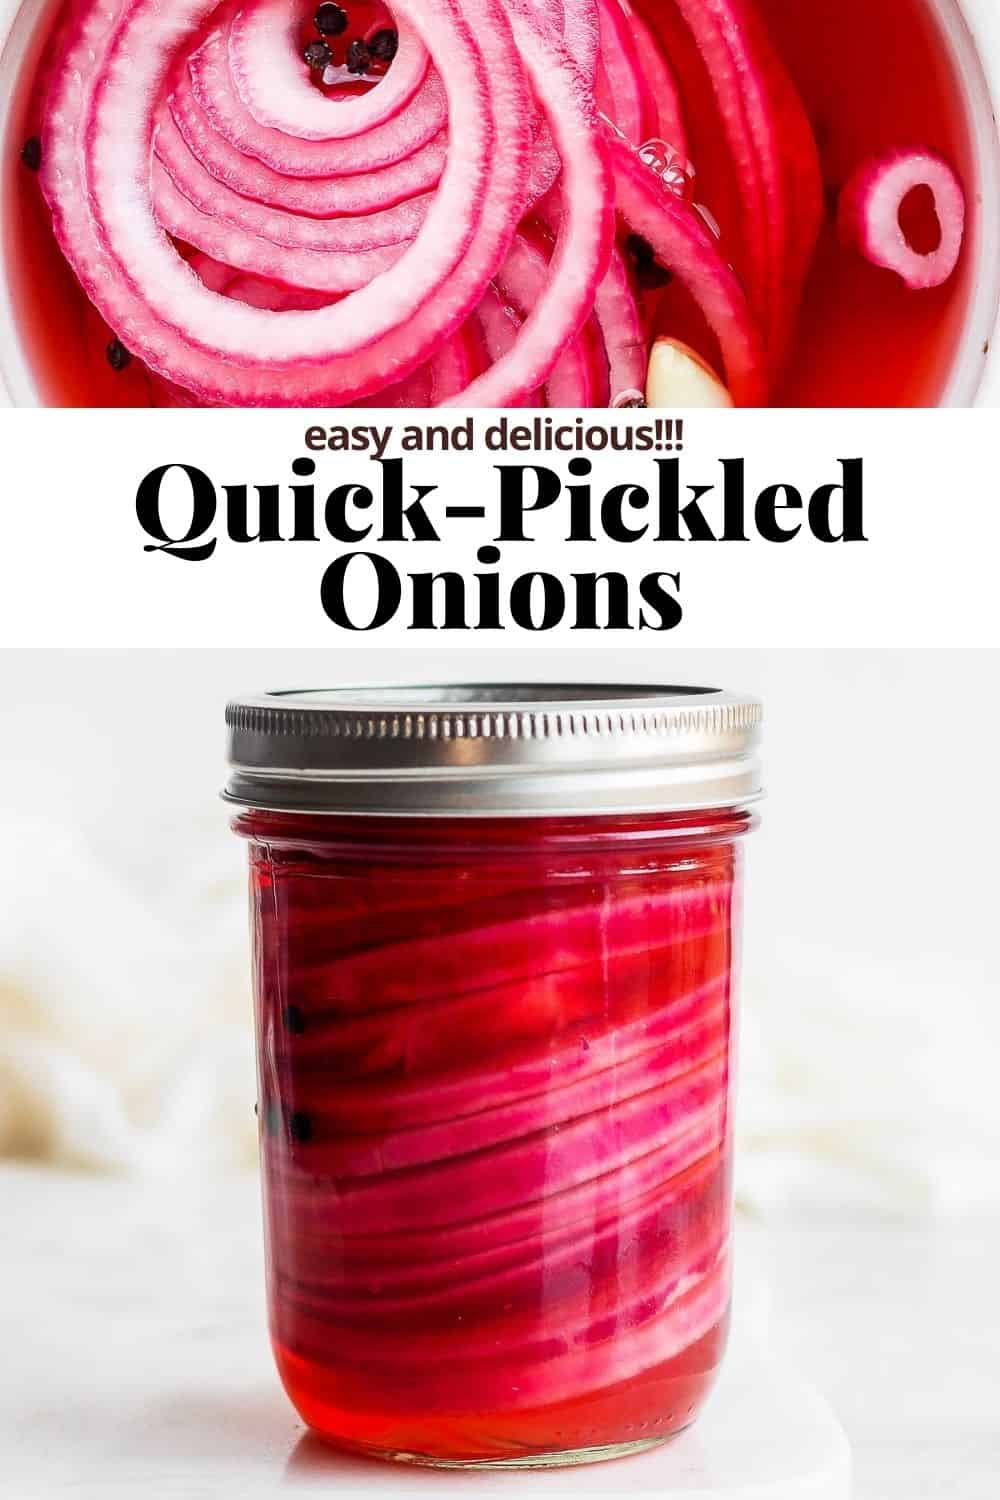 Pinterest image for quick pickled onions.